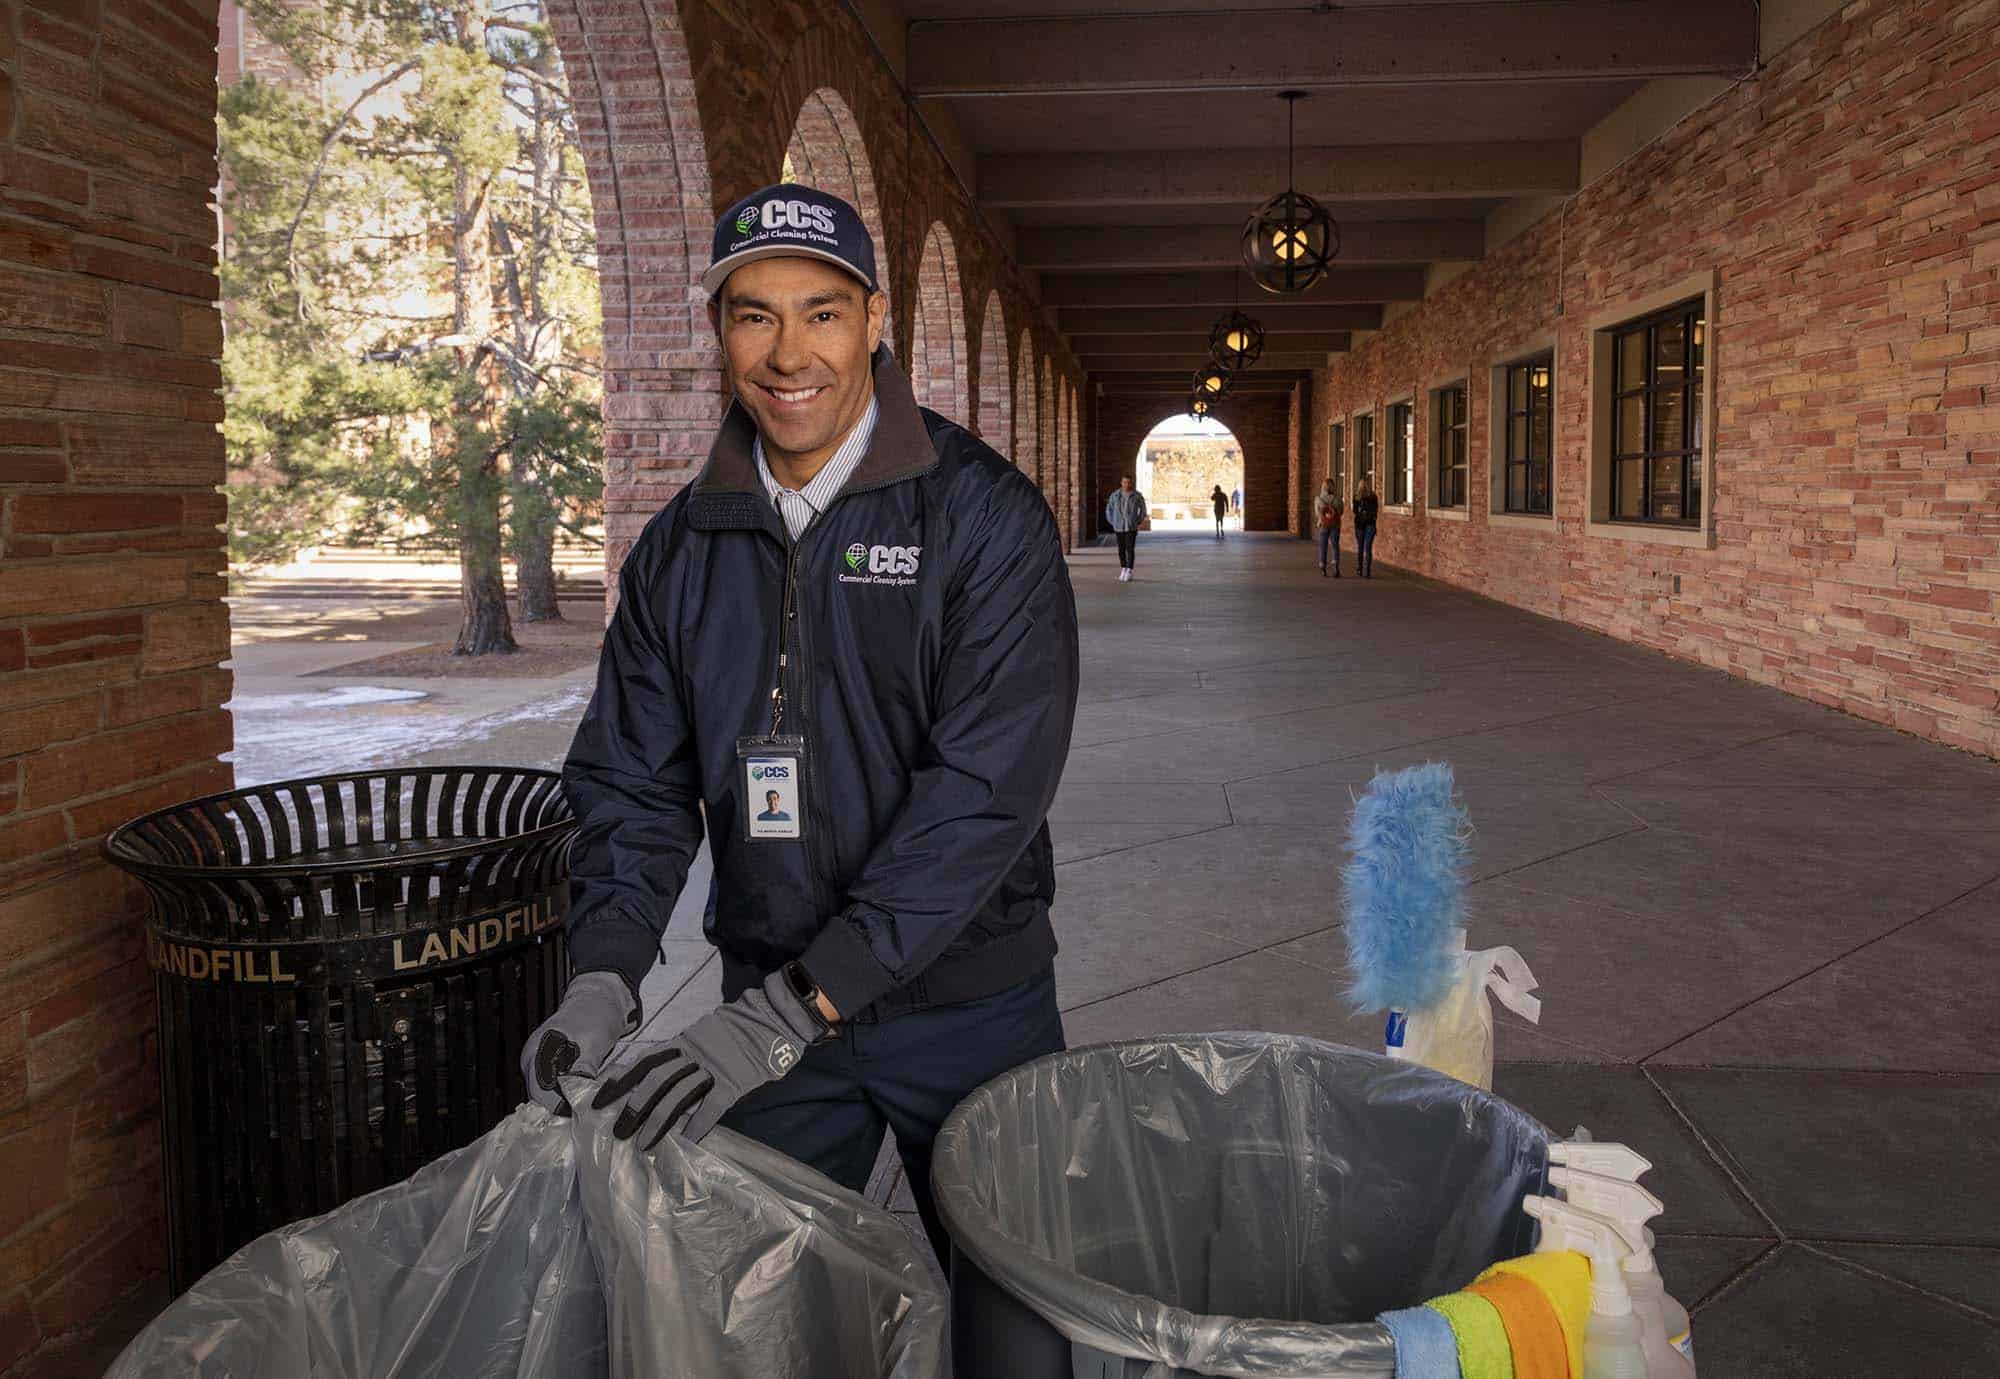 ccs employee taking the trash out of an educational facility